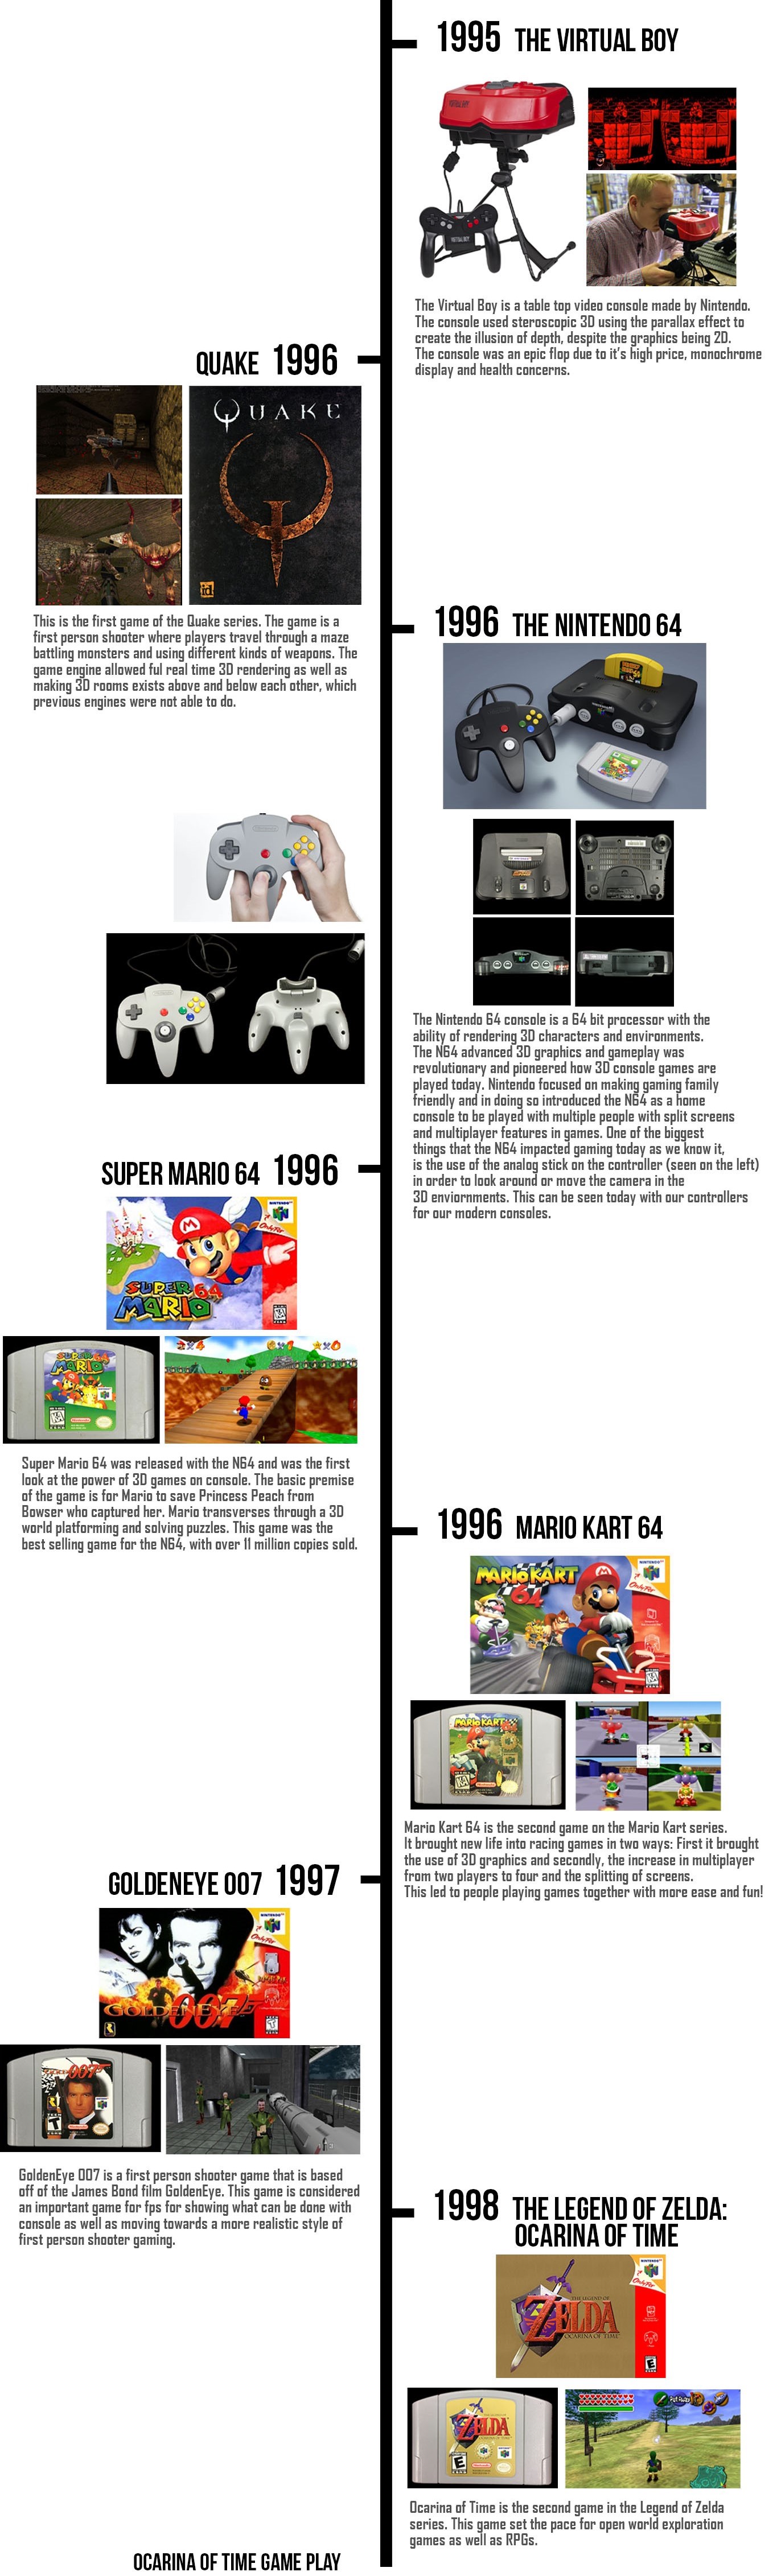 The Rise of 3D Games timeline